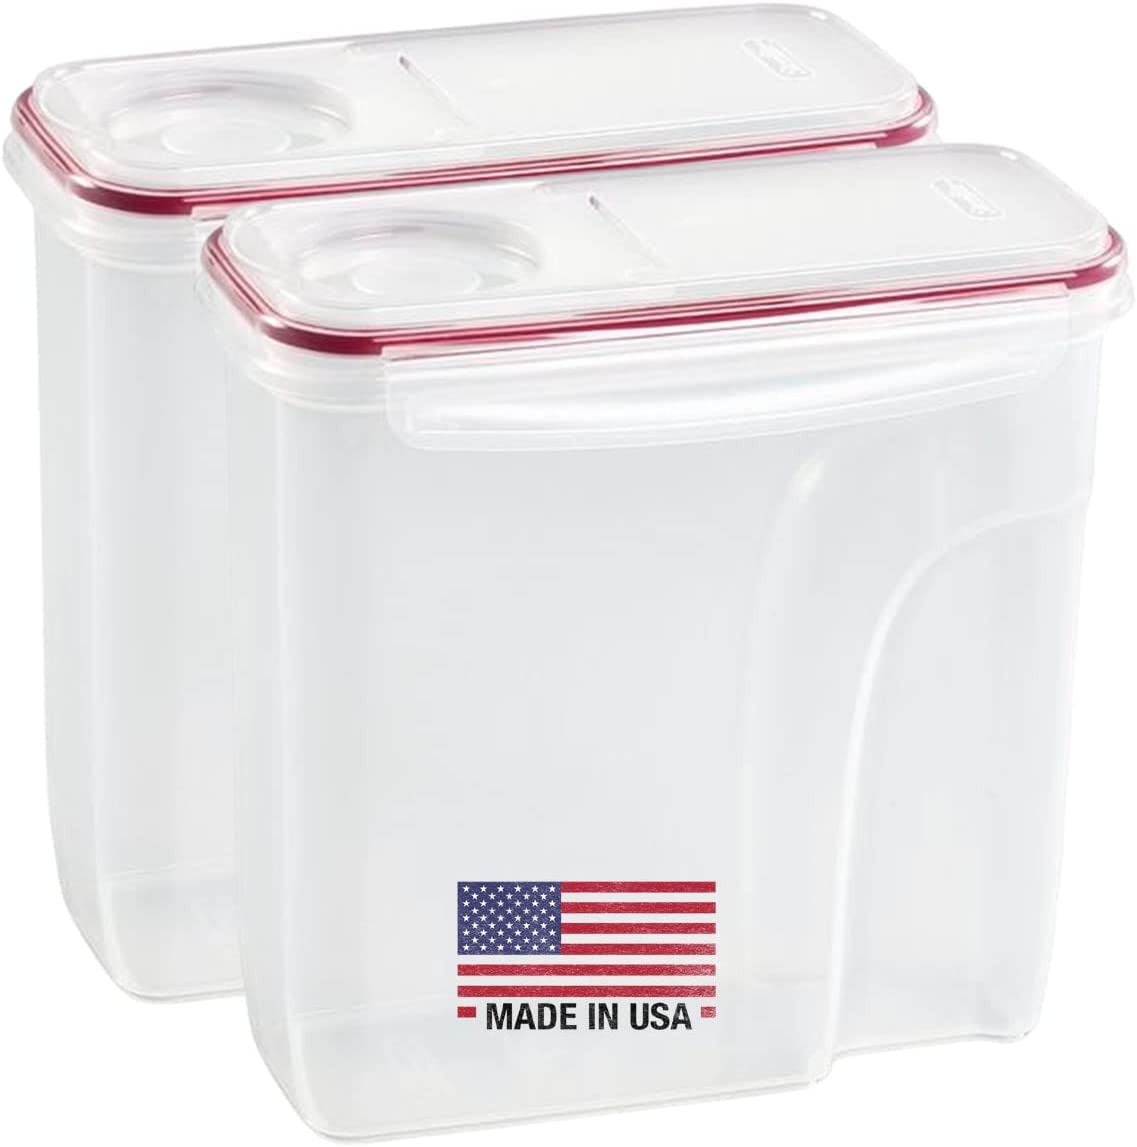 Cereal Containers Storage Dispenser Extra Large 1.5 Gallon (192 Oz) Keeps Fresh Cereal Airtight Lid Plastic, Dog or Cat Food Containers Family-Size Cereal Keeper, Dishwasher Safe – Made In USA – 2 Pack